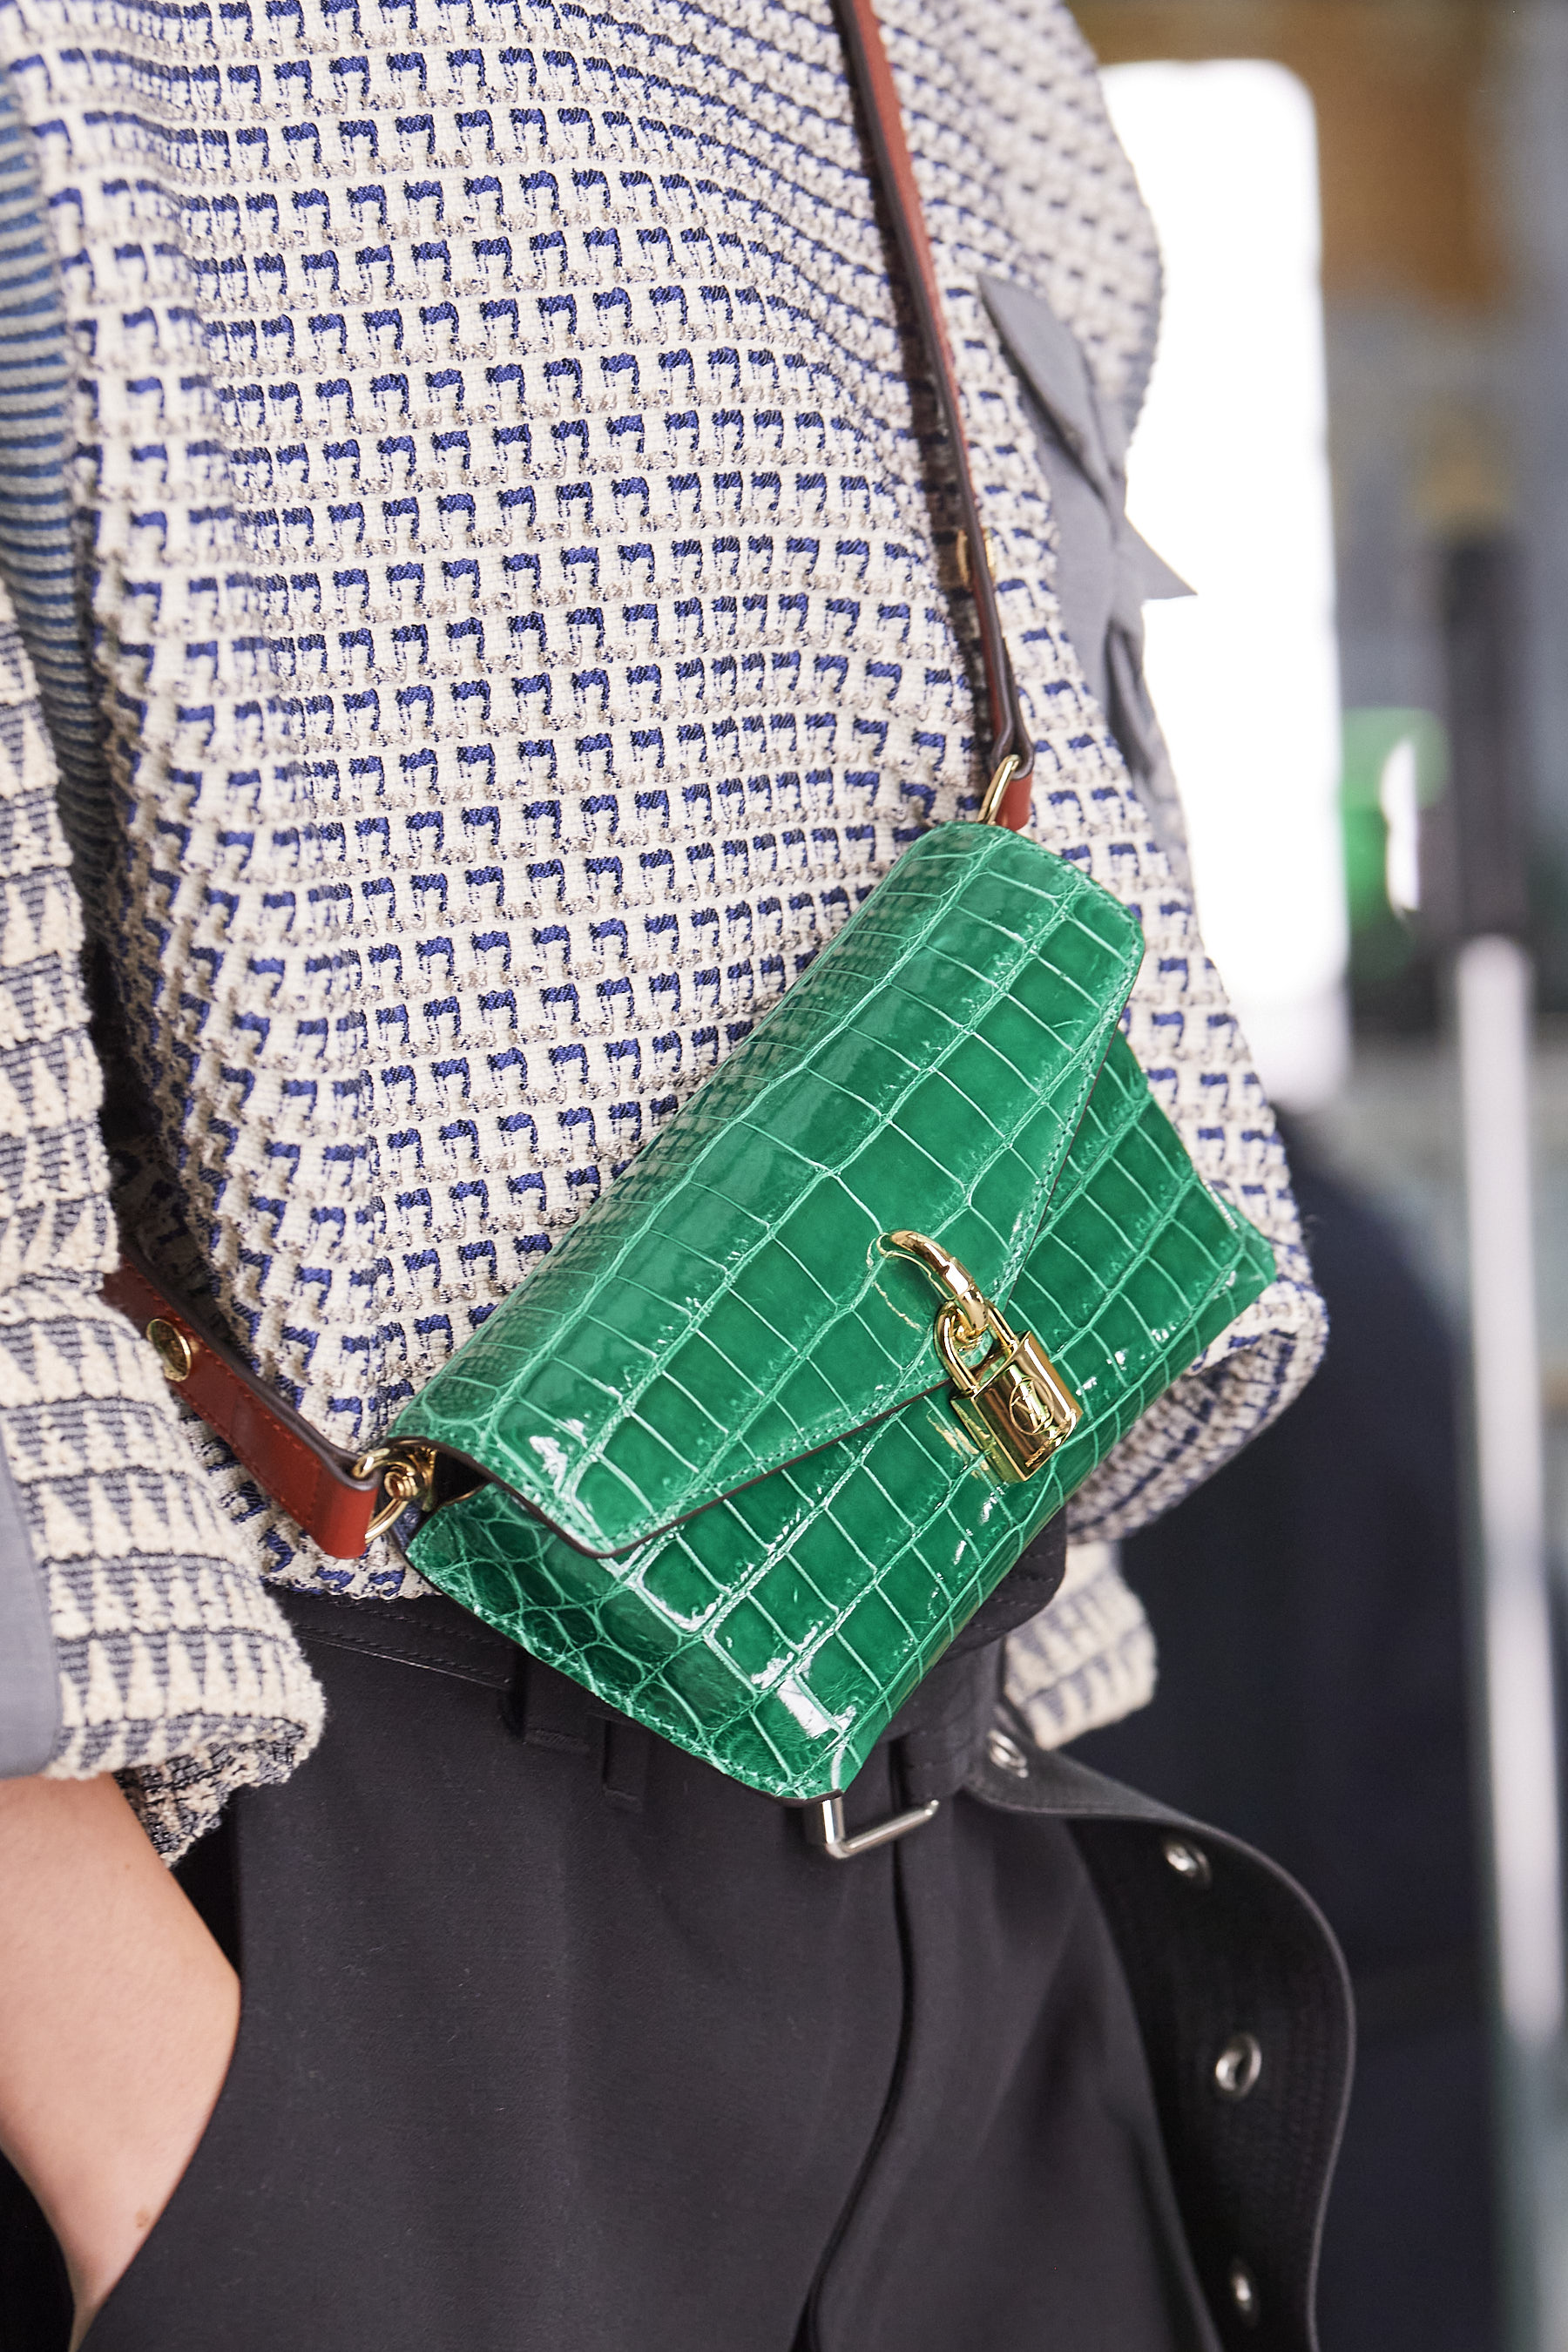 2021 Bag Trend: These Are the Most-Wanted Styles